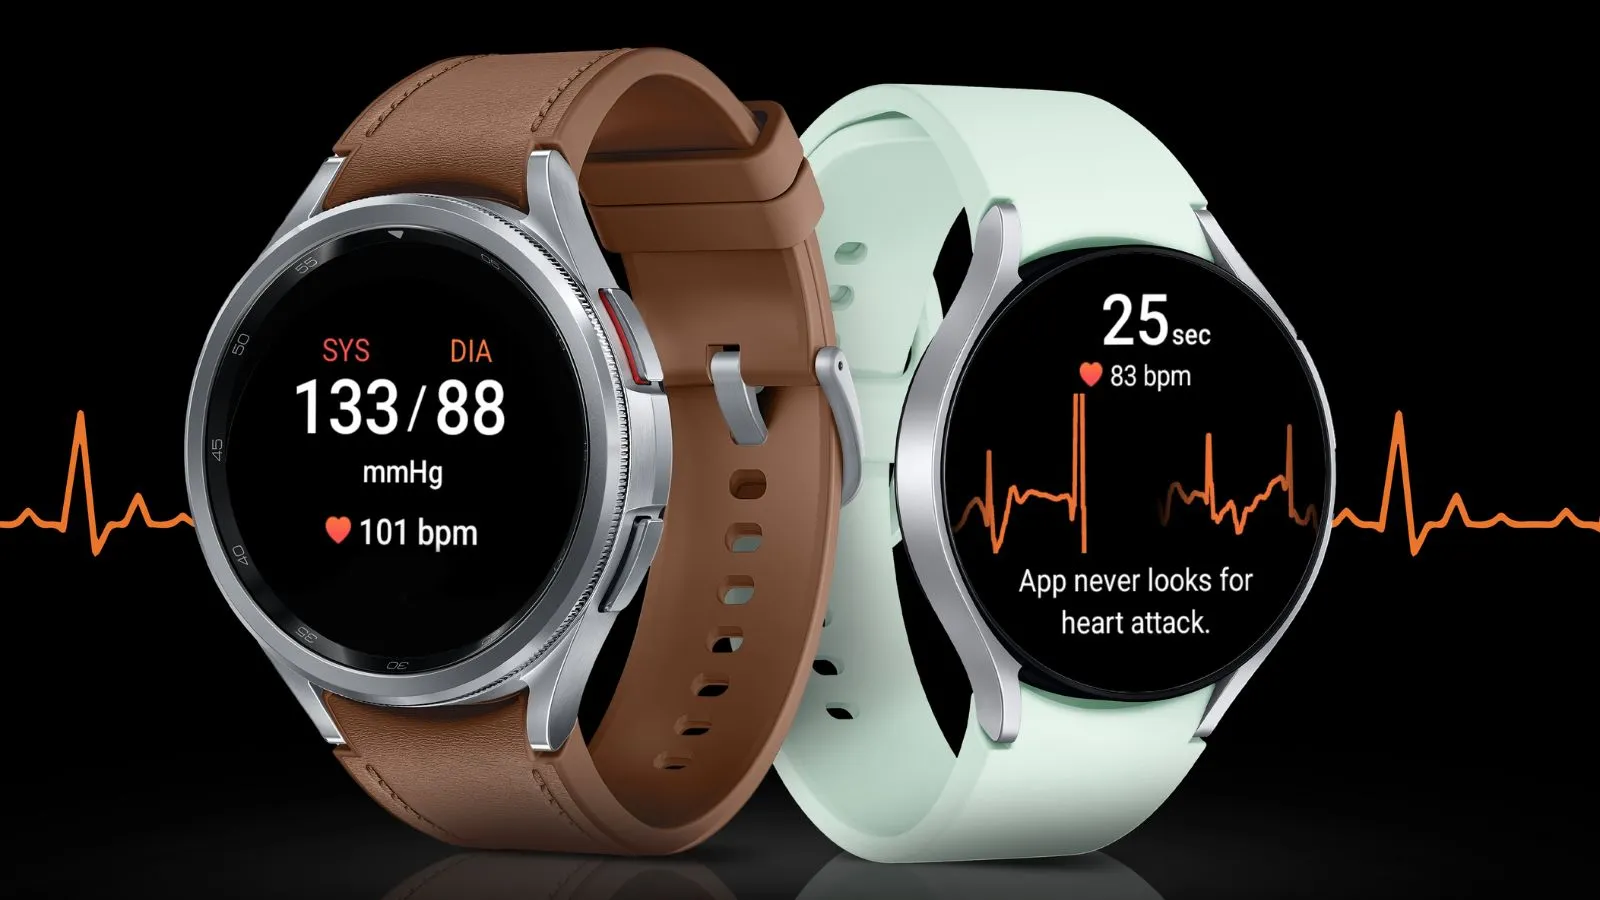 How to use the heart rate monitor on Galaxy Gear Fit